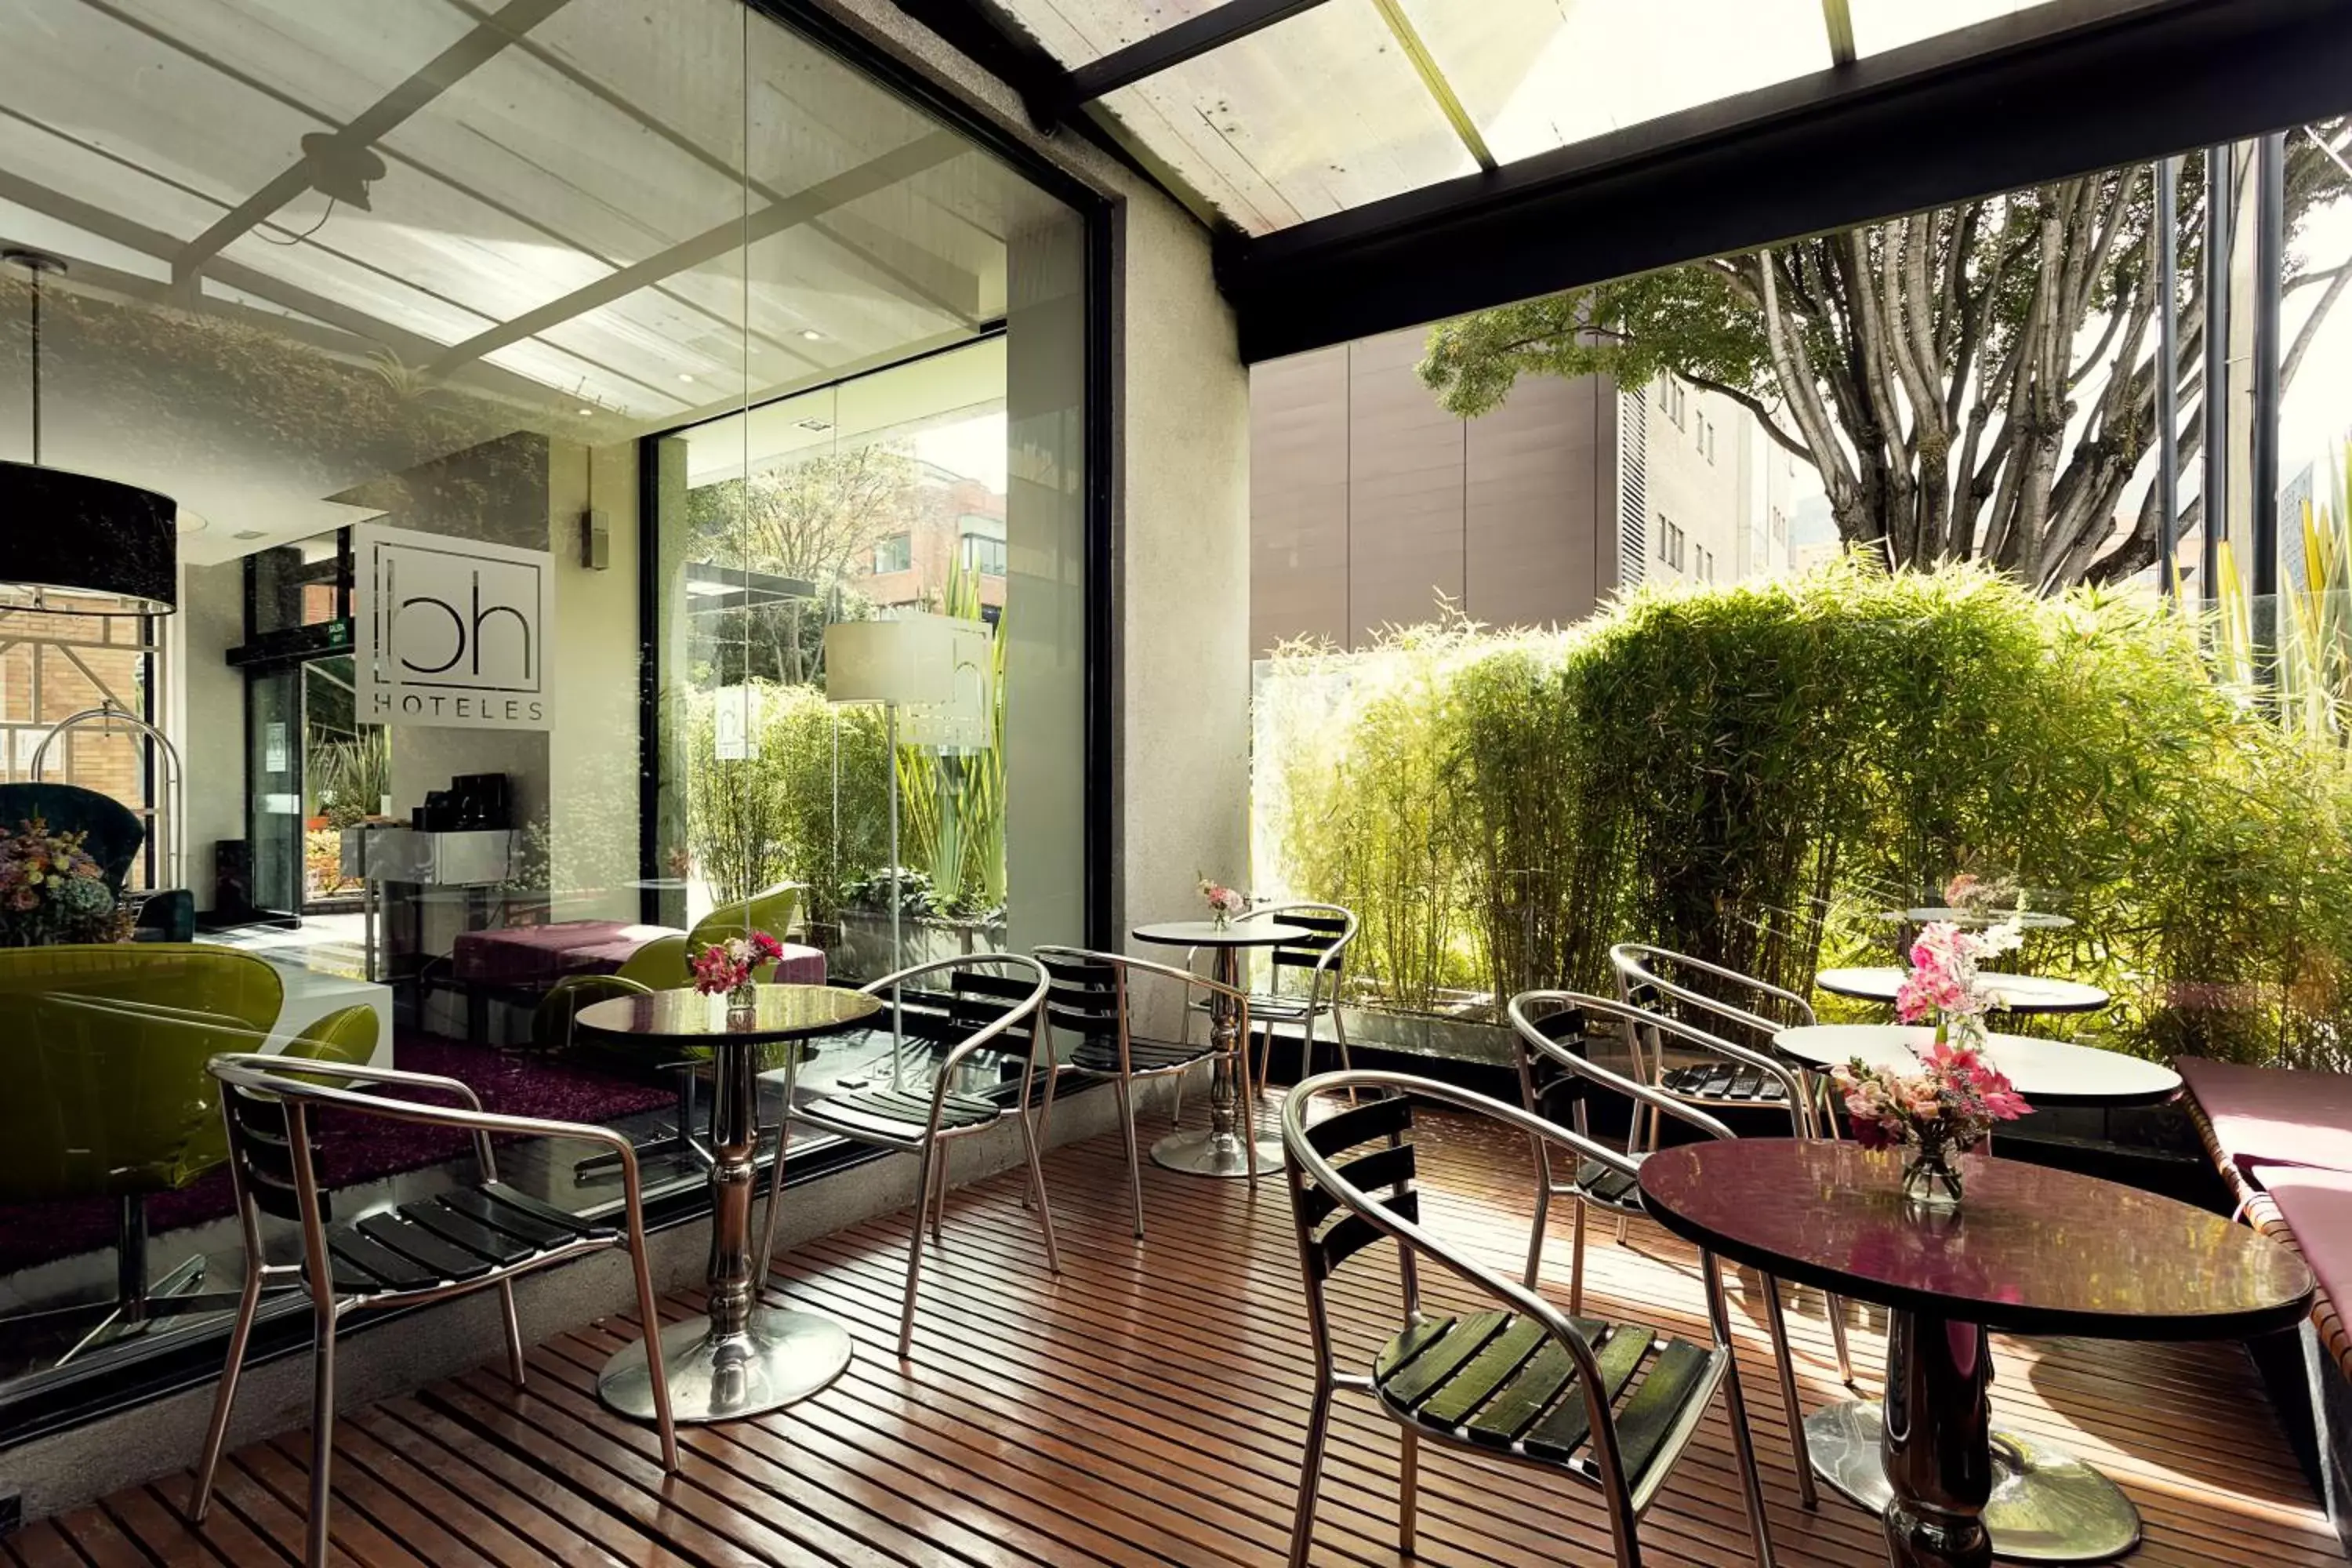 Restaurant/places to eat in Hotel bh Parque 93